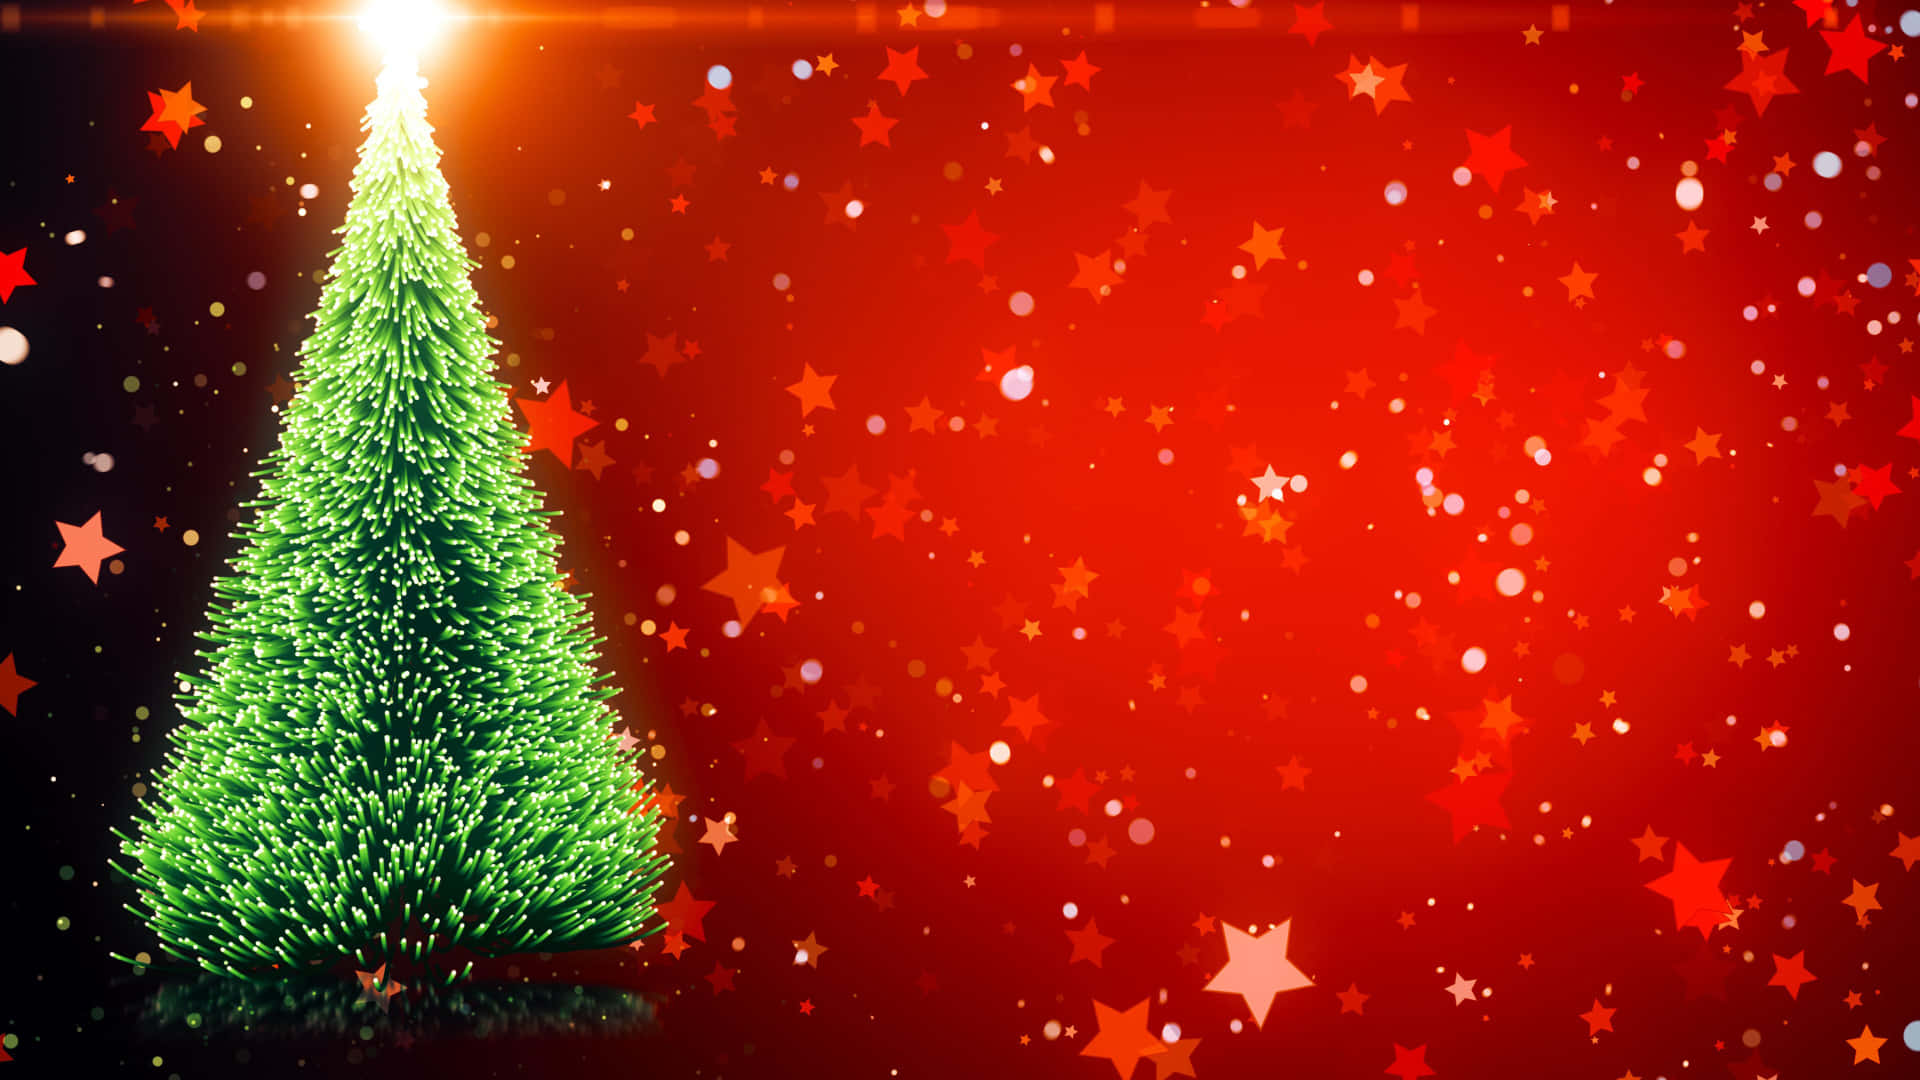 Landscape Red And Green Christmas Tree Background